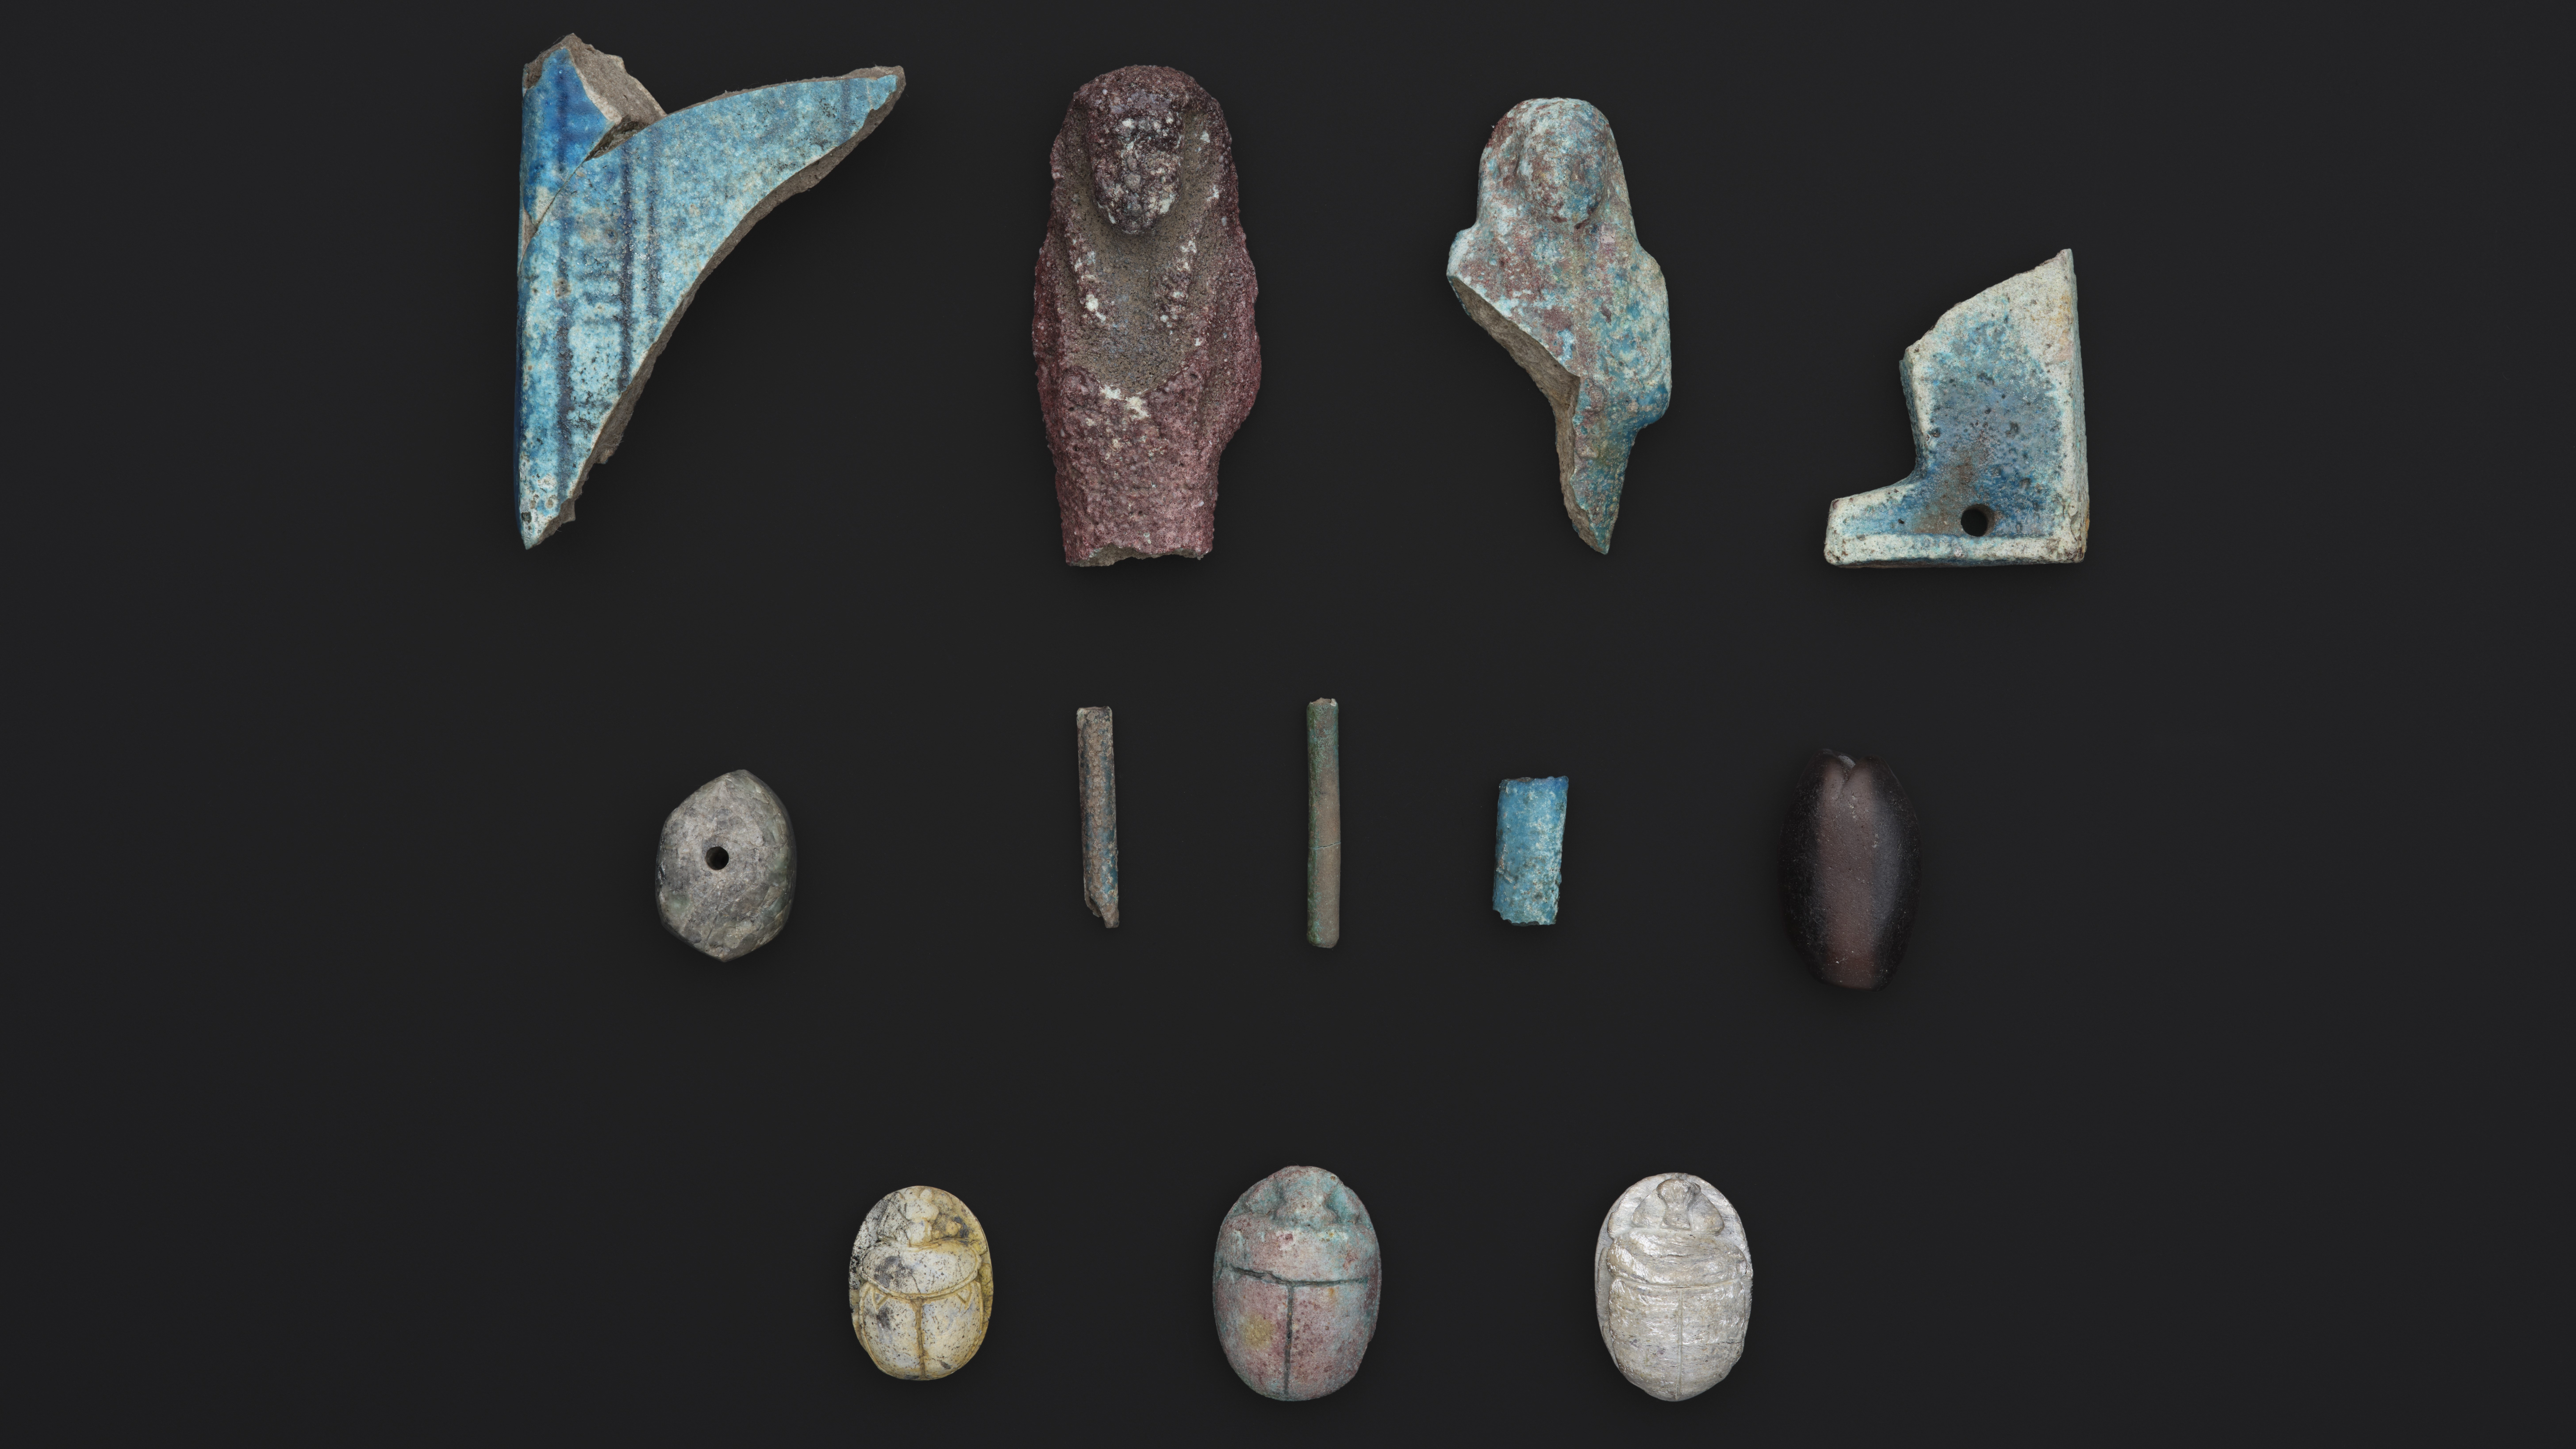 A collection of ancient Egyptian artifacts unearthed on the grounds of Melville House in Scotland.